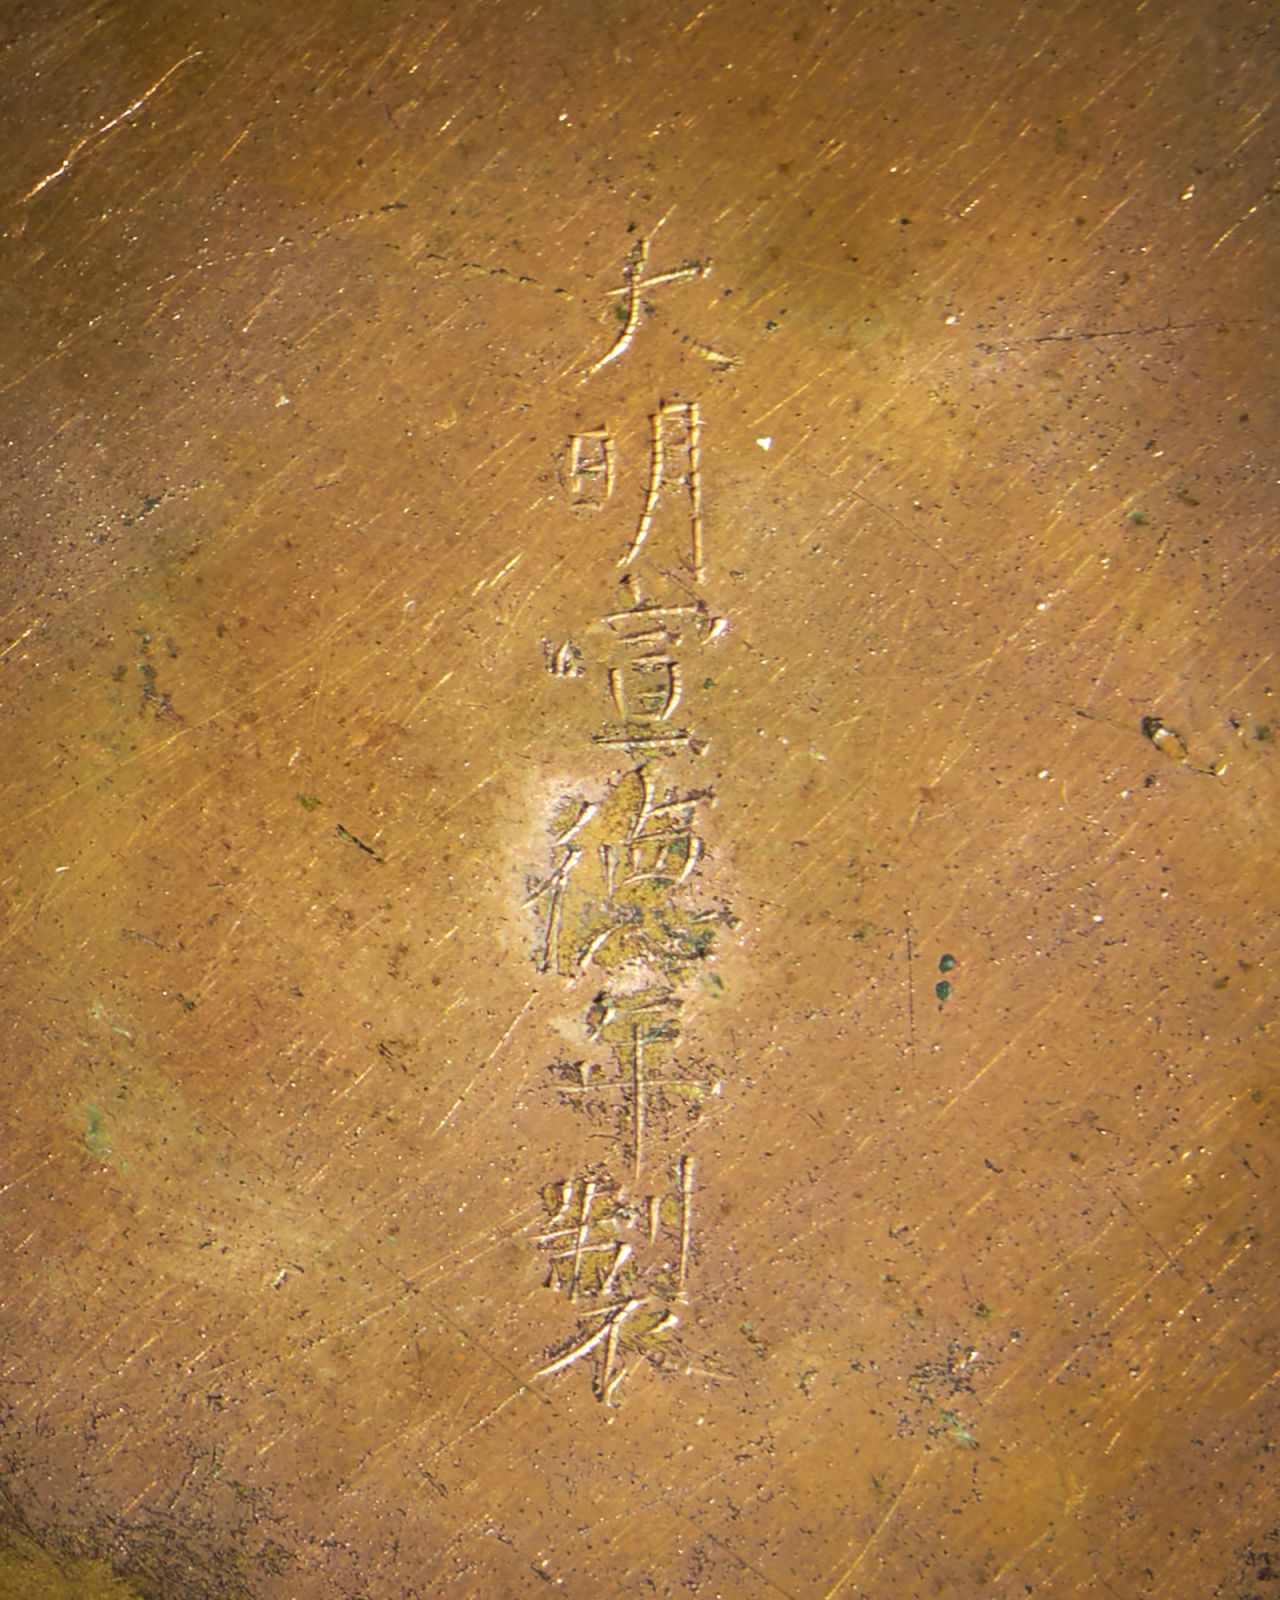 The box features markings of Xuande, fifth Emperor of the Ming Dynasty.